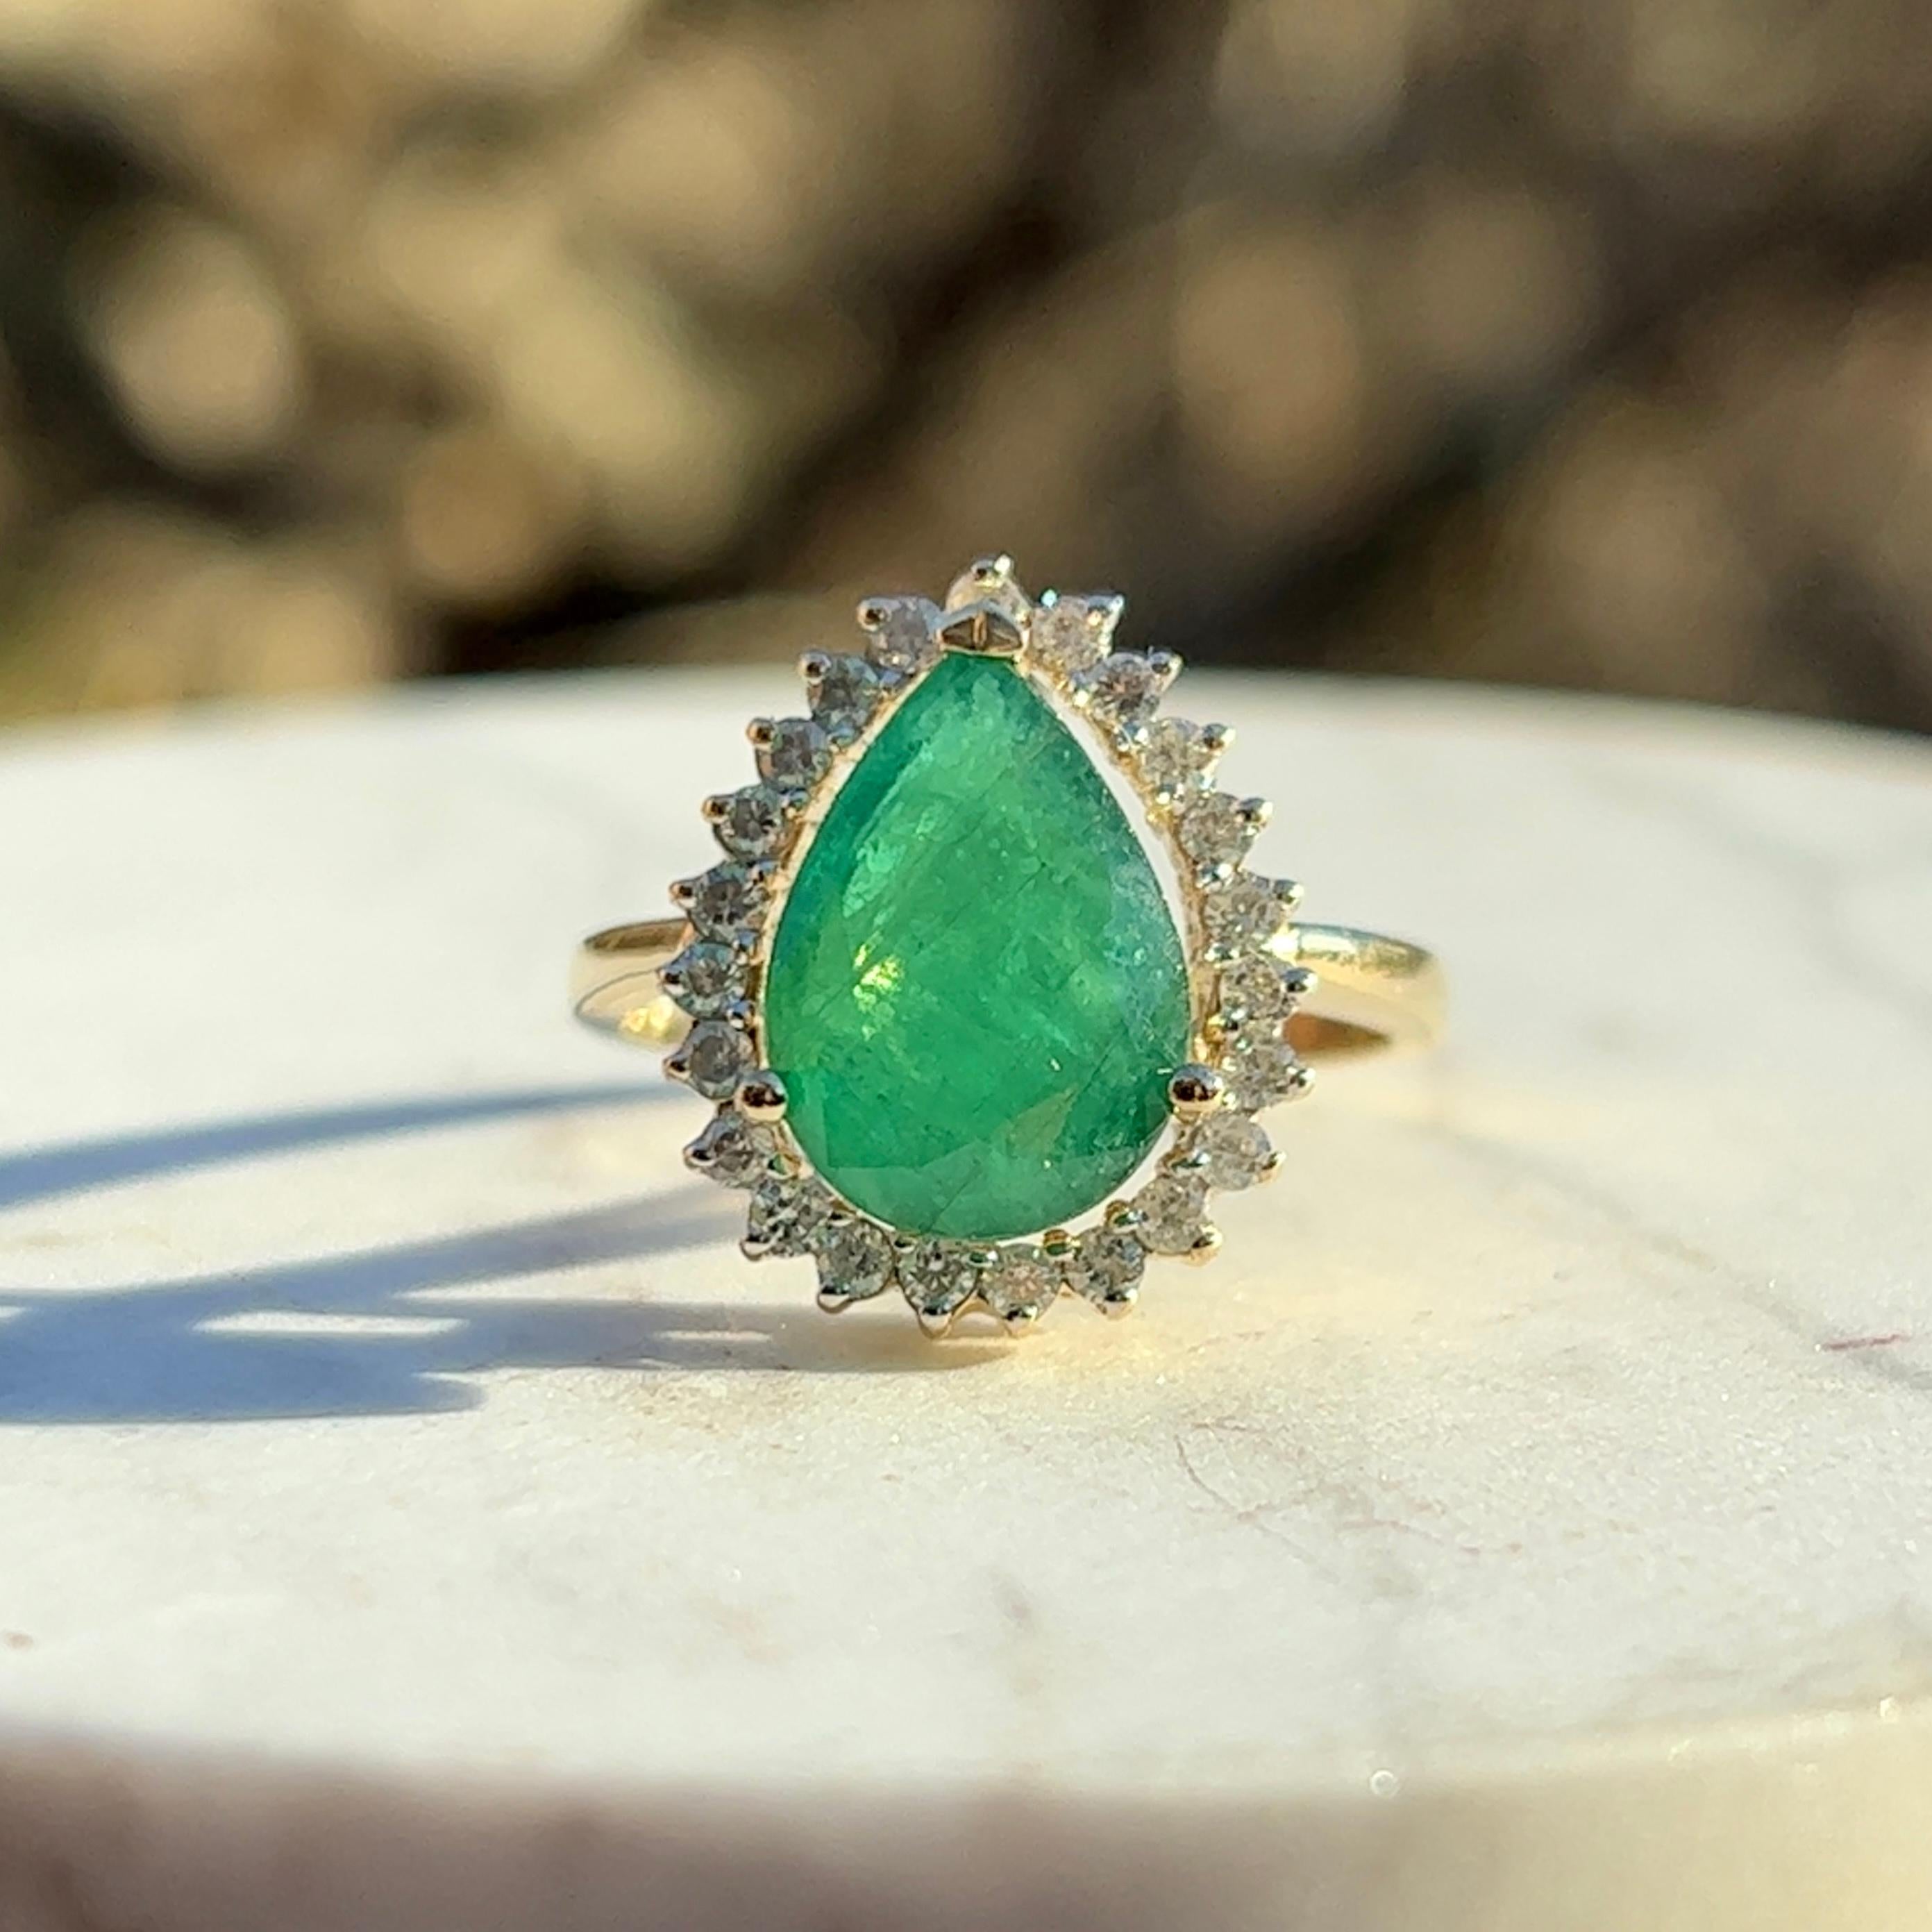 Contemporary Pear Shaped Emerald Diamond Halo Ring in 14K Yellow Gold 4